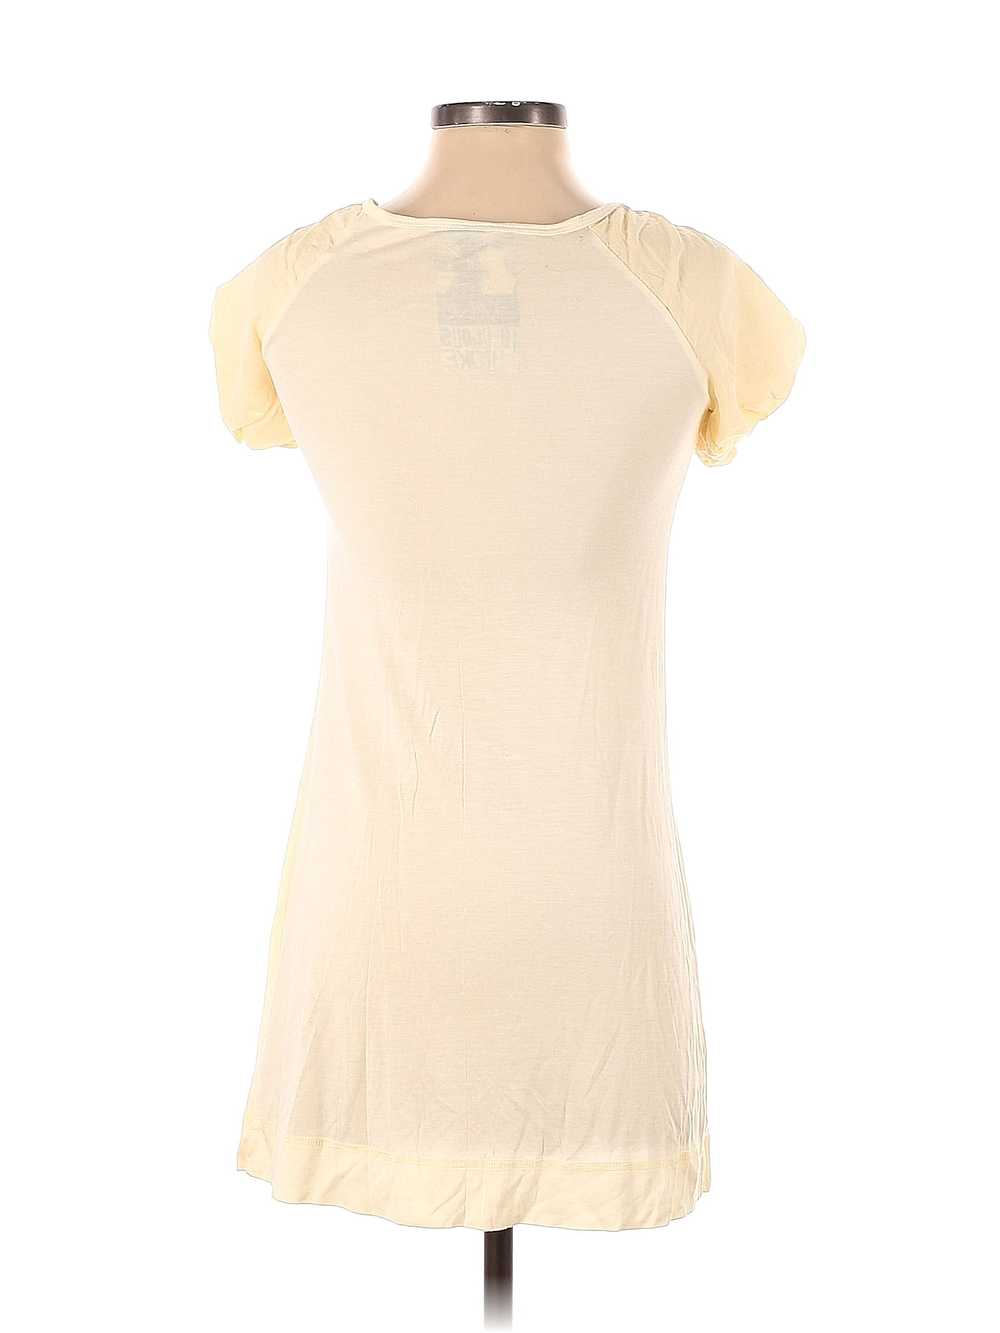 Unbranded Women Ivory Casual Dress XS - image 2